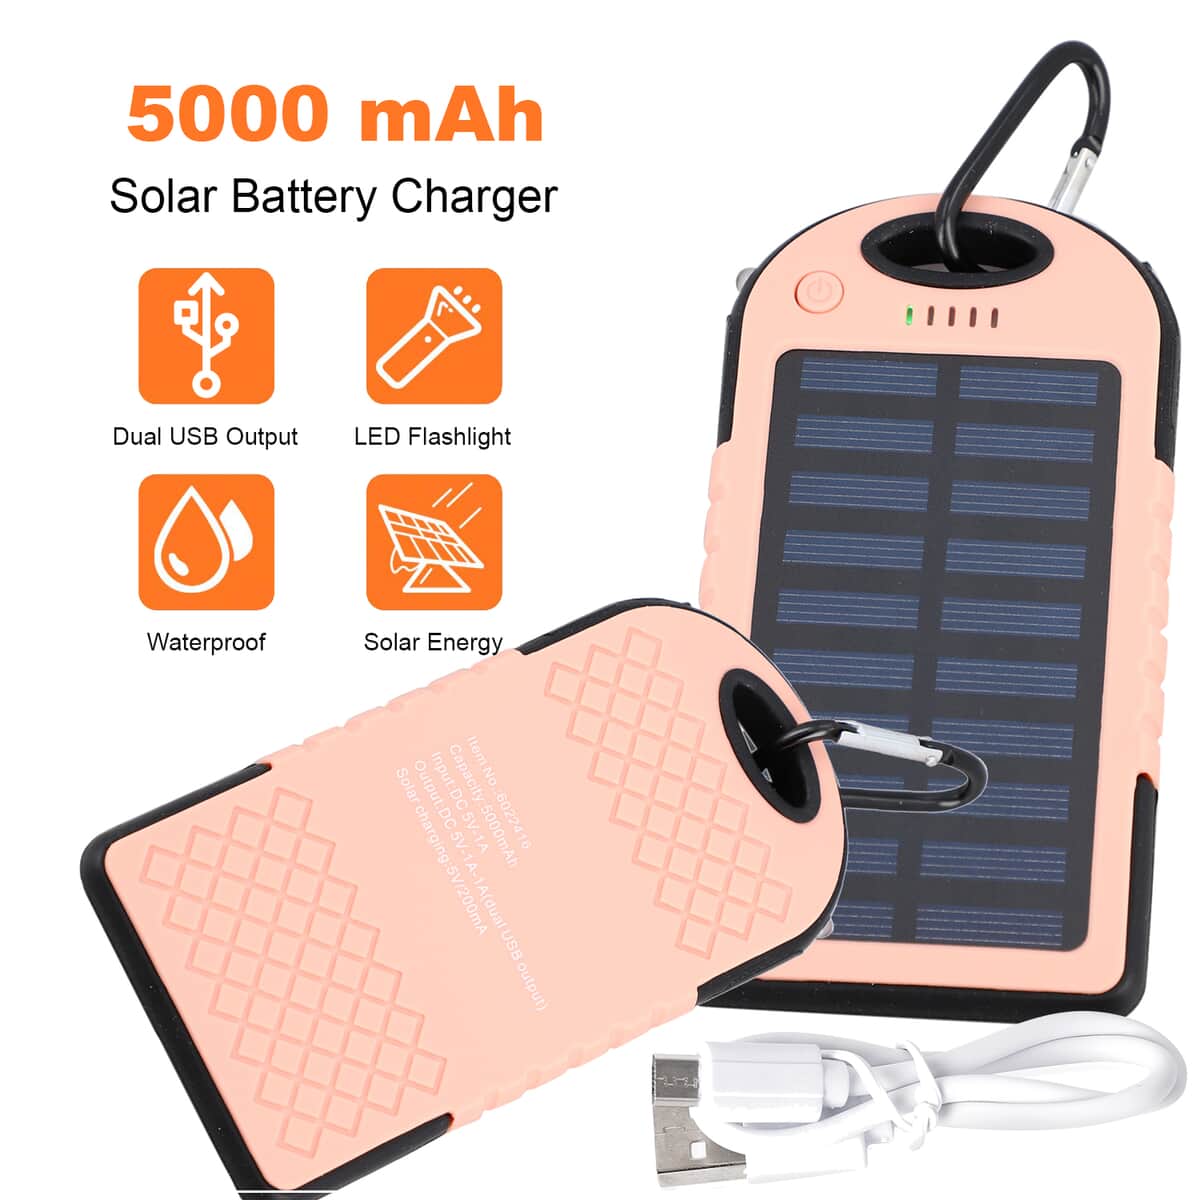 Homesmart Blush Carabiner Solar 5000 mAh Battery Charger with USB & Emergency LED Torch image number 1